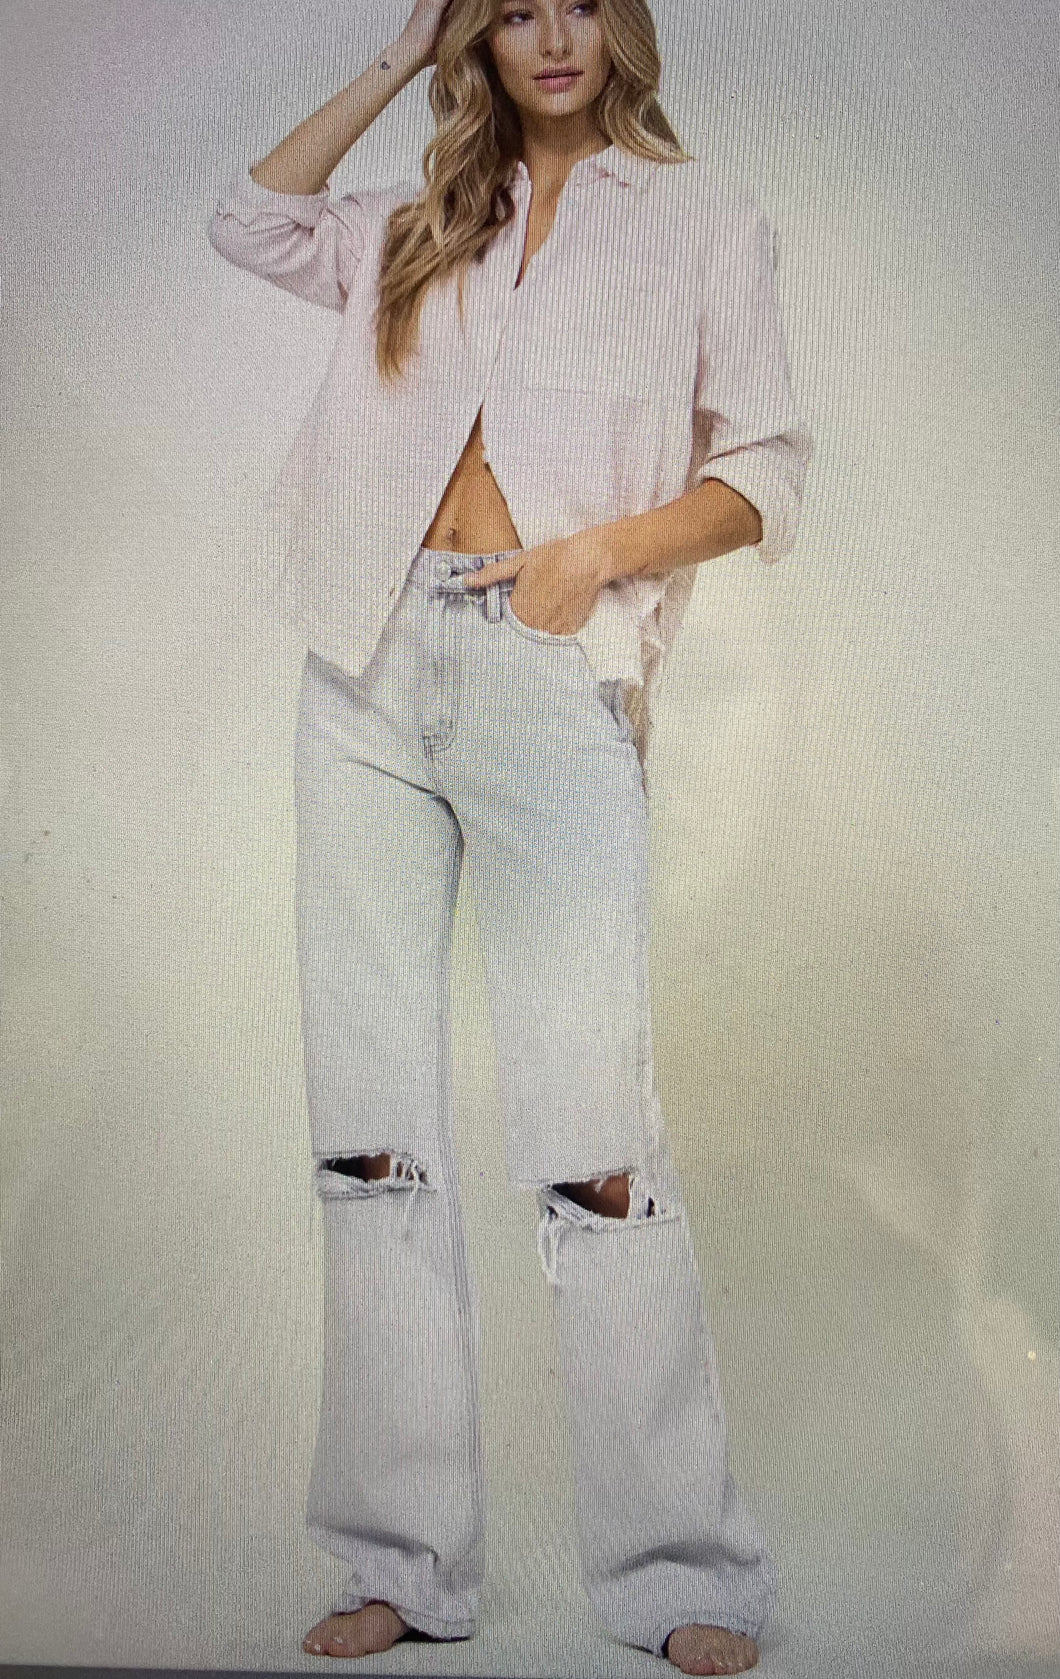 90's babe jeans